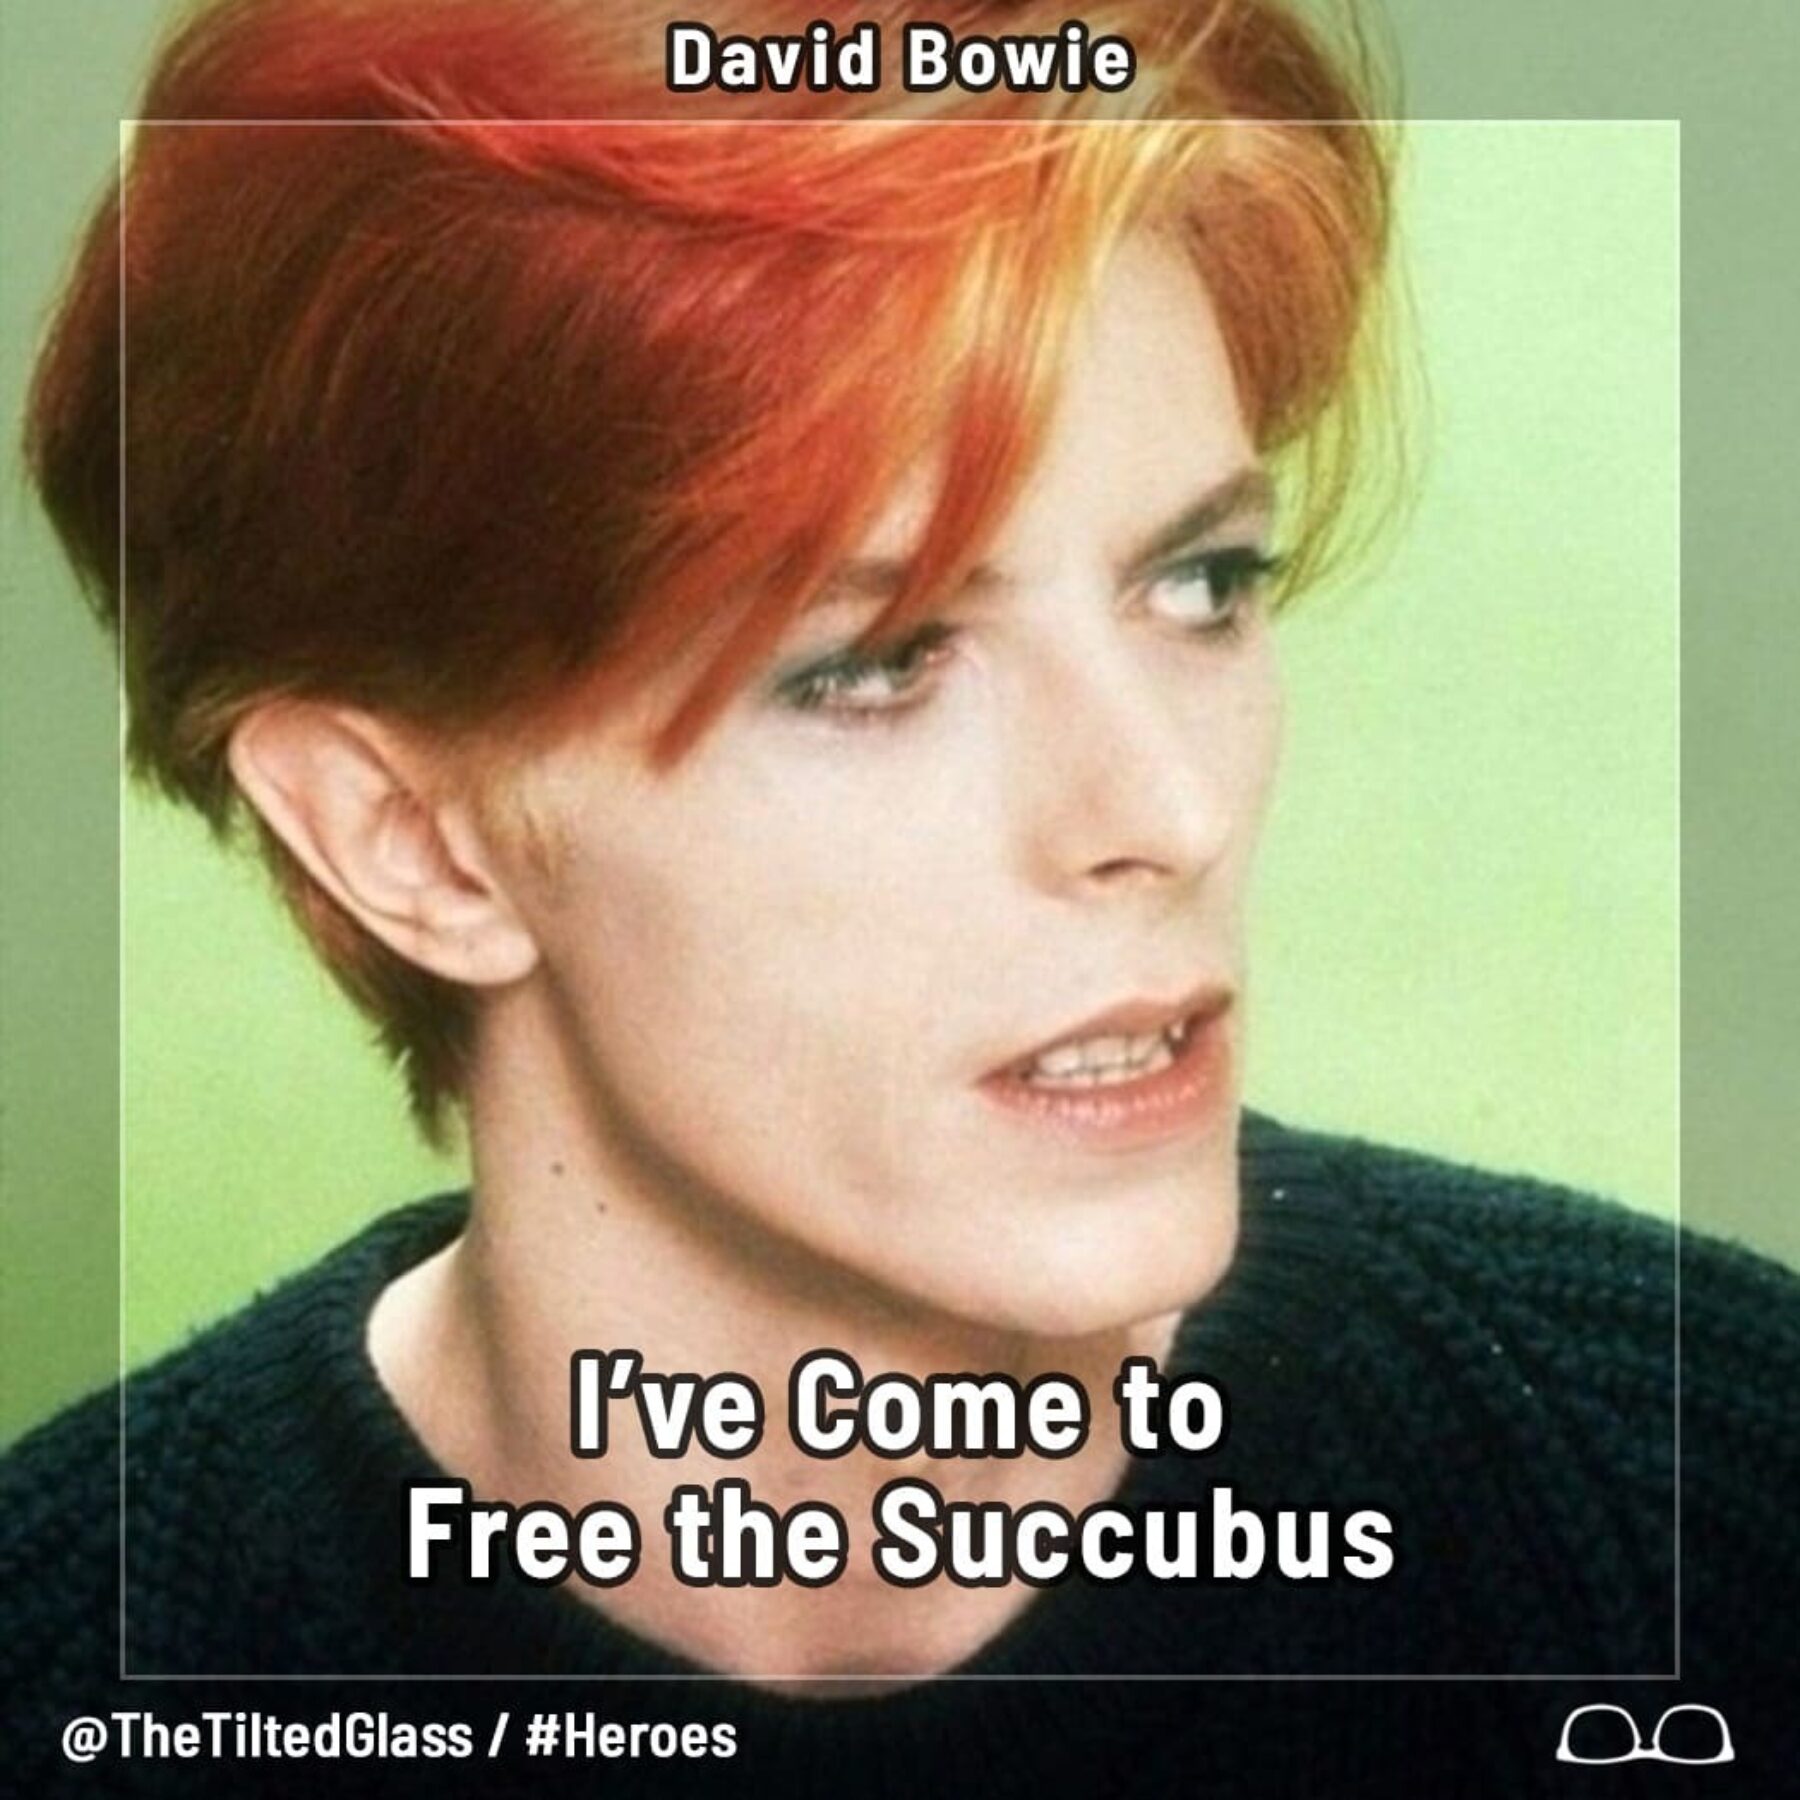 David Bowie: I've Come to Free the Succubus